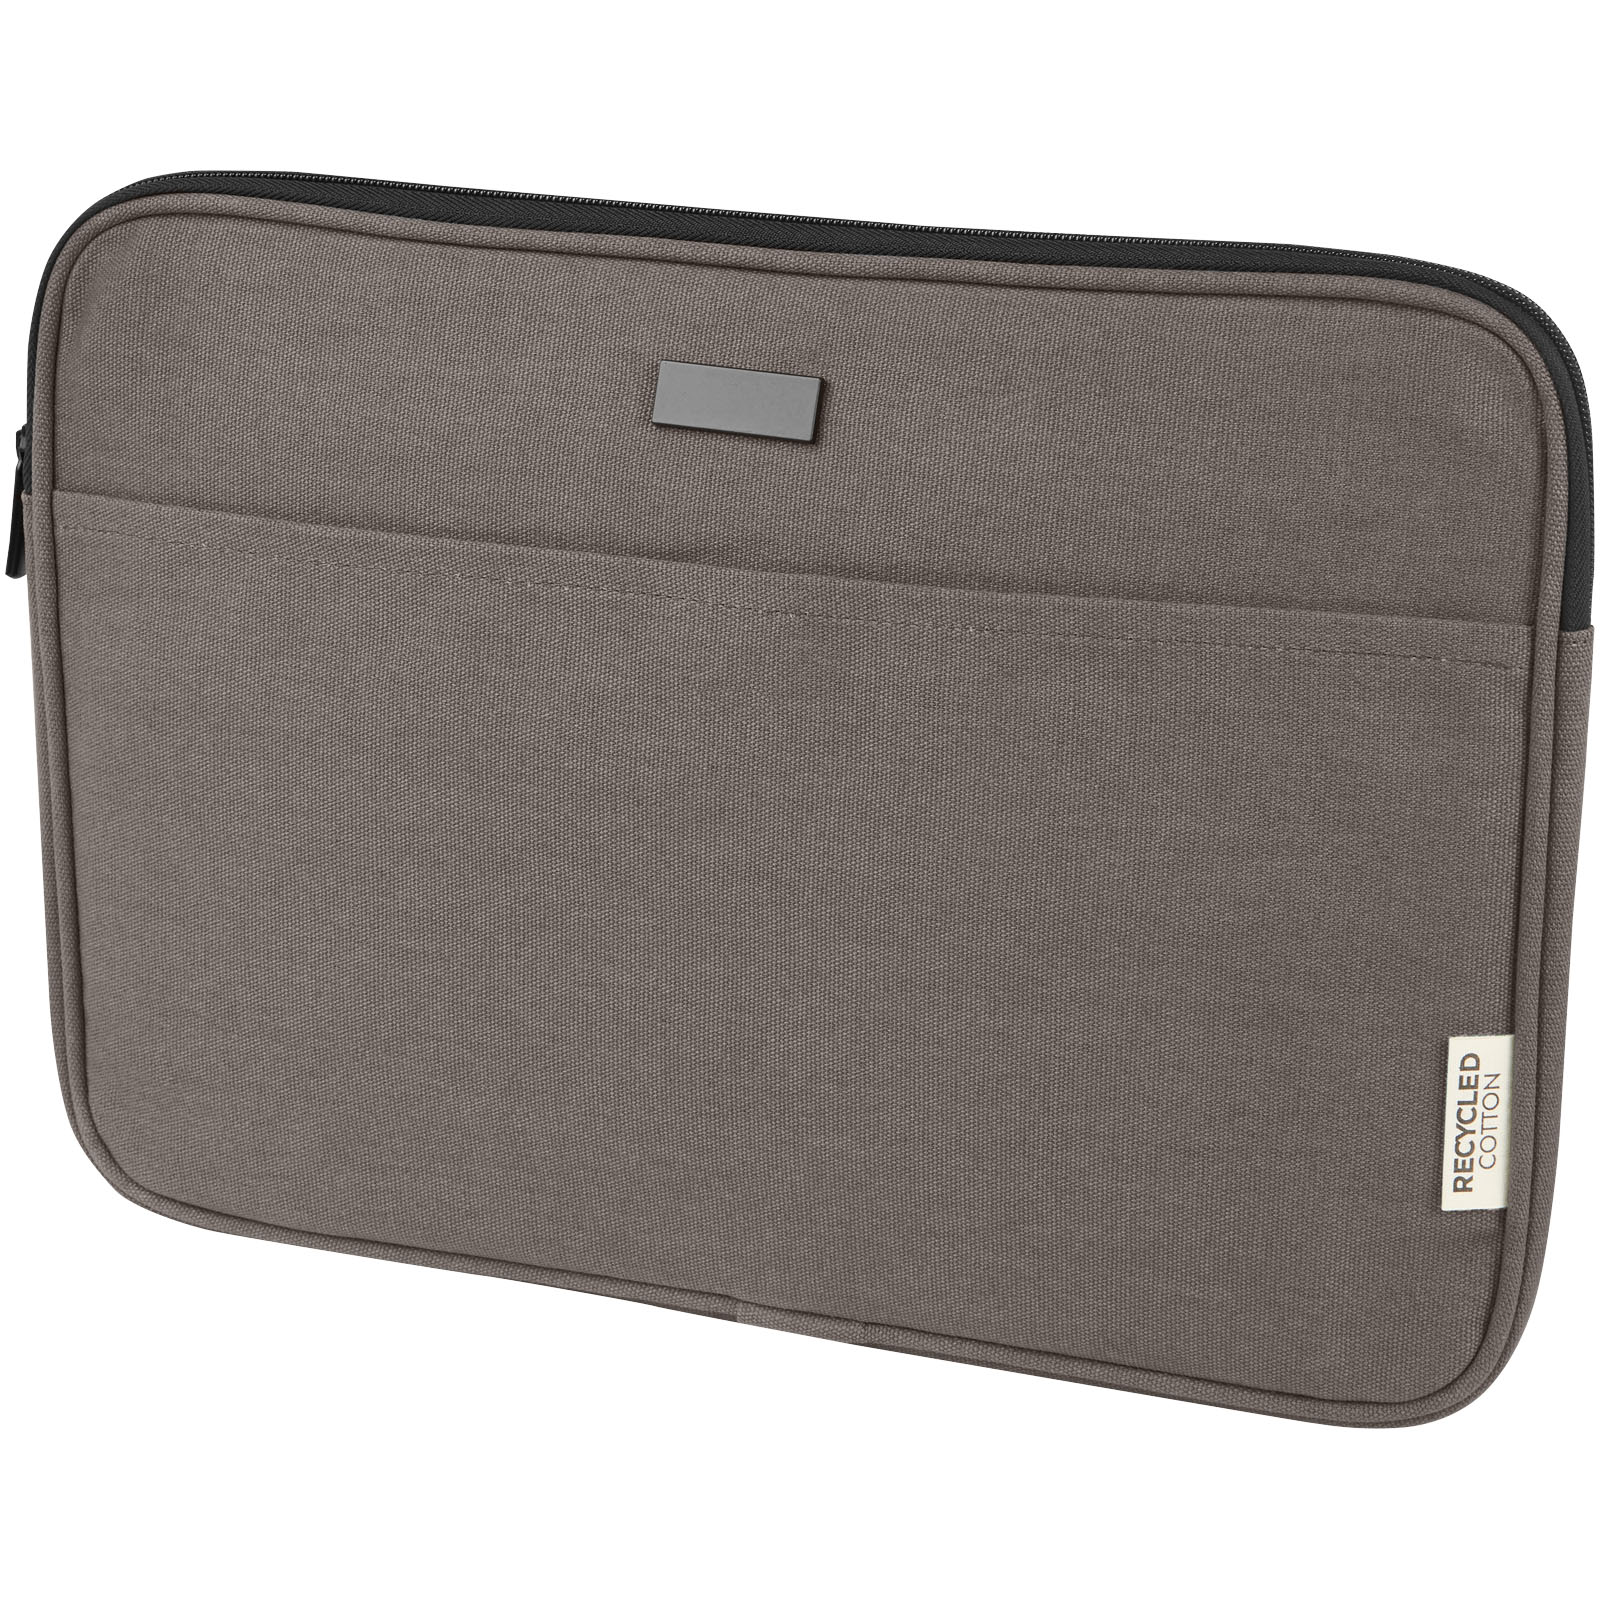 Textile laptop sleeve TILER made of recycled canvas, 2 l